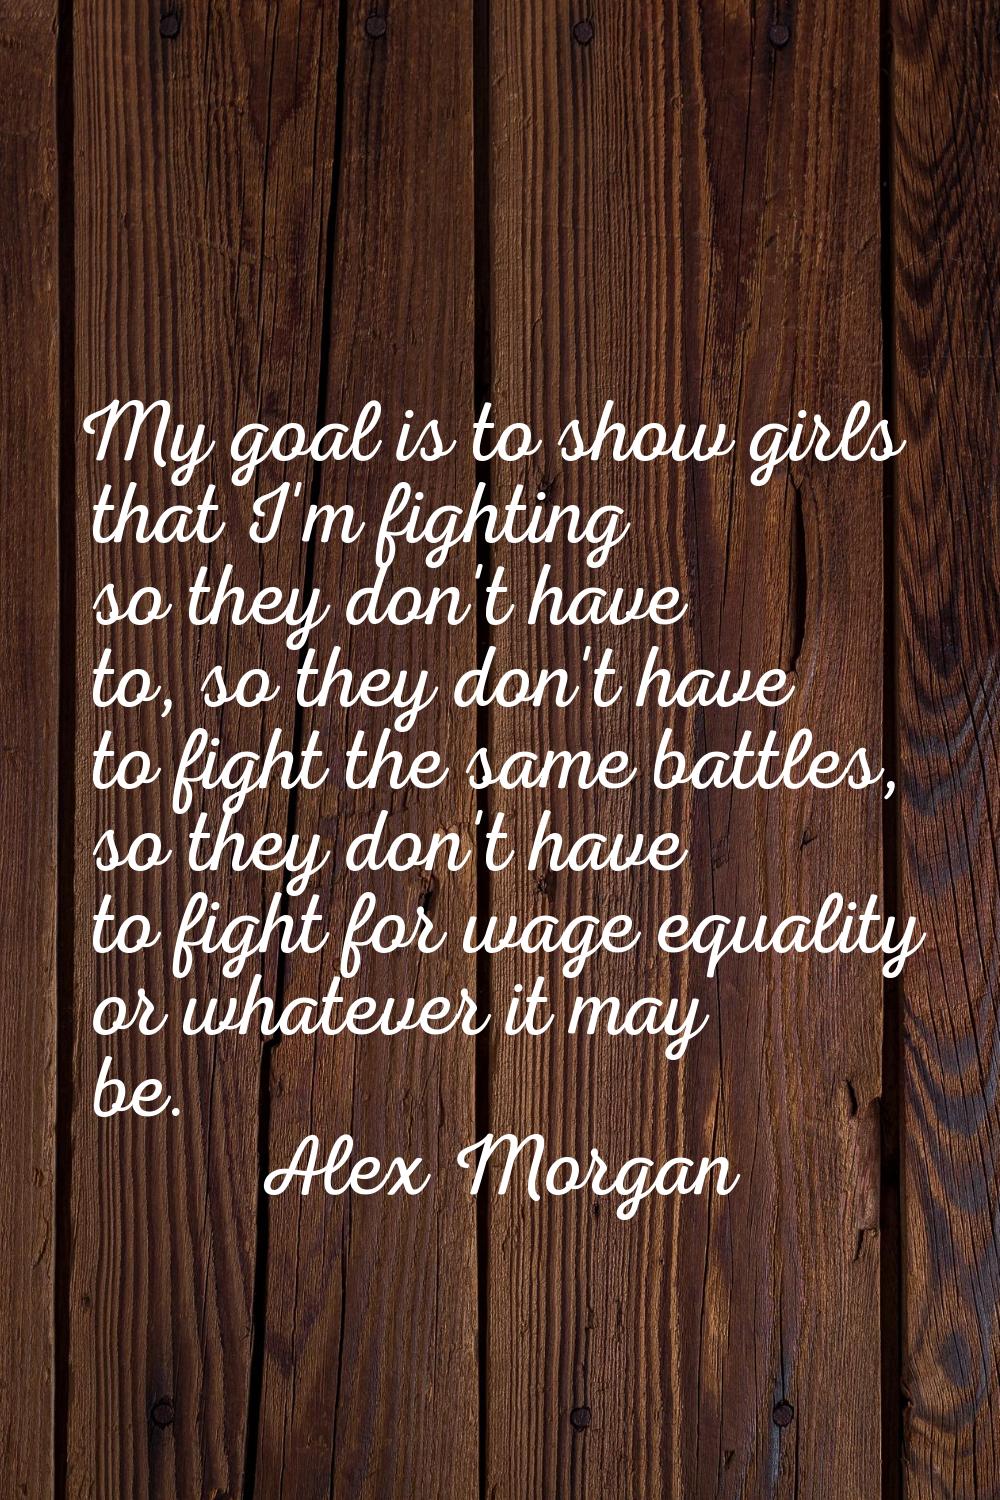 My goal is to show girls that I'm fighting so they don't have to, so they don't have to fight the s